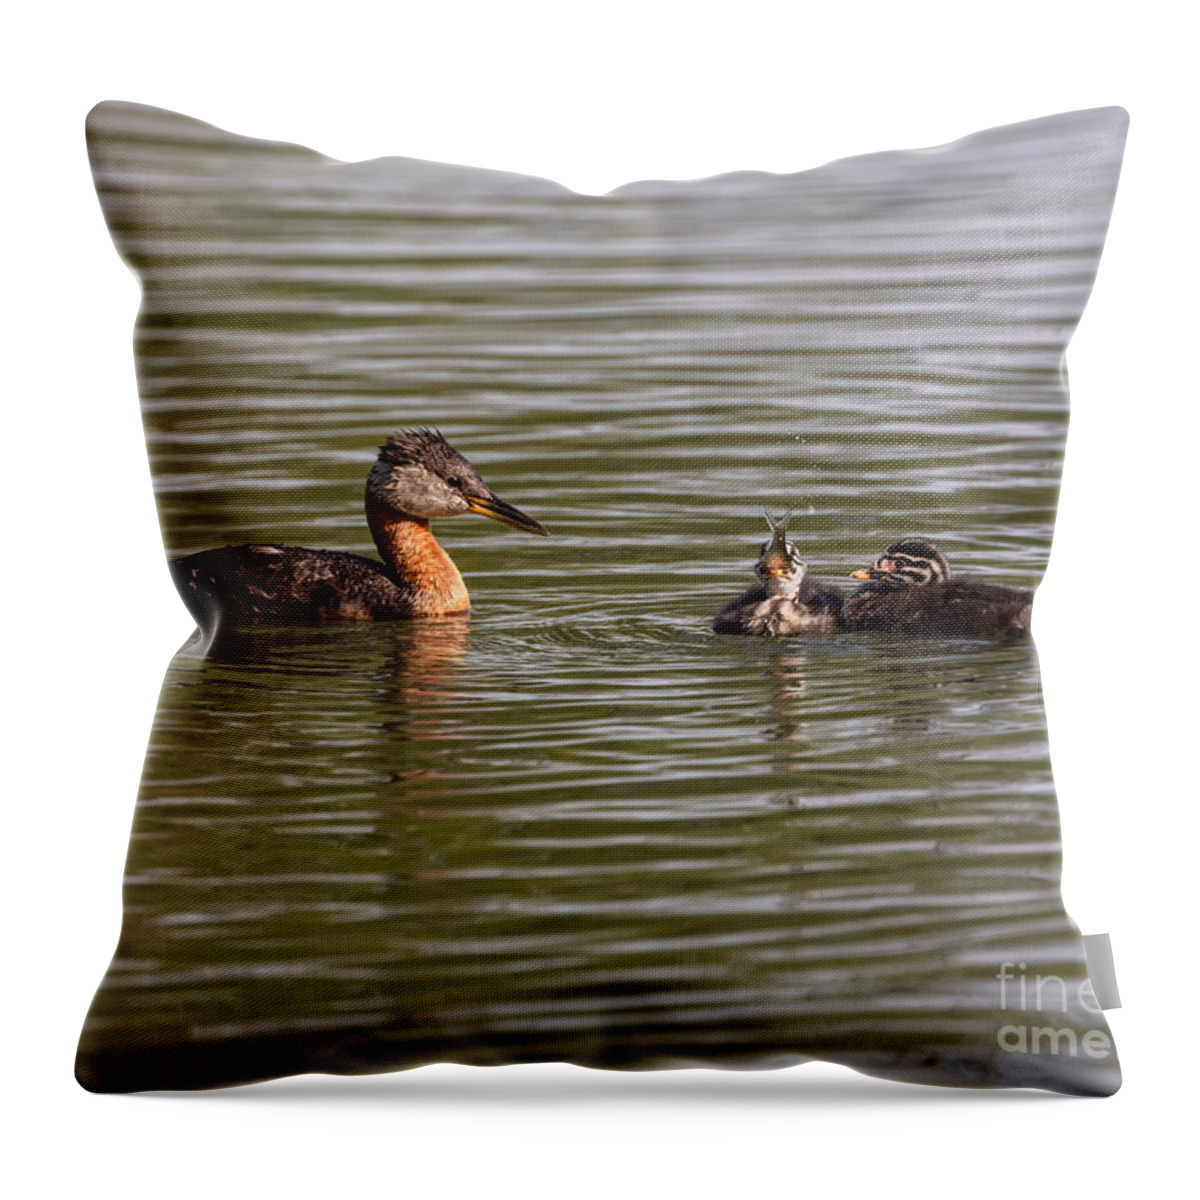 Photography Throw Pillow featuring the photograph Yummy Fish by Alma Danison